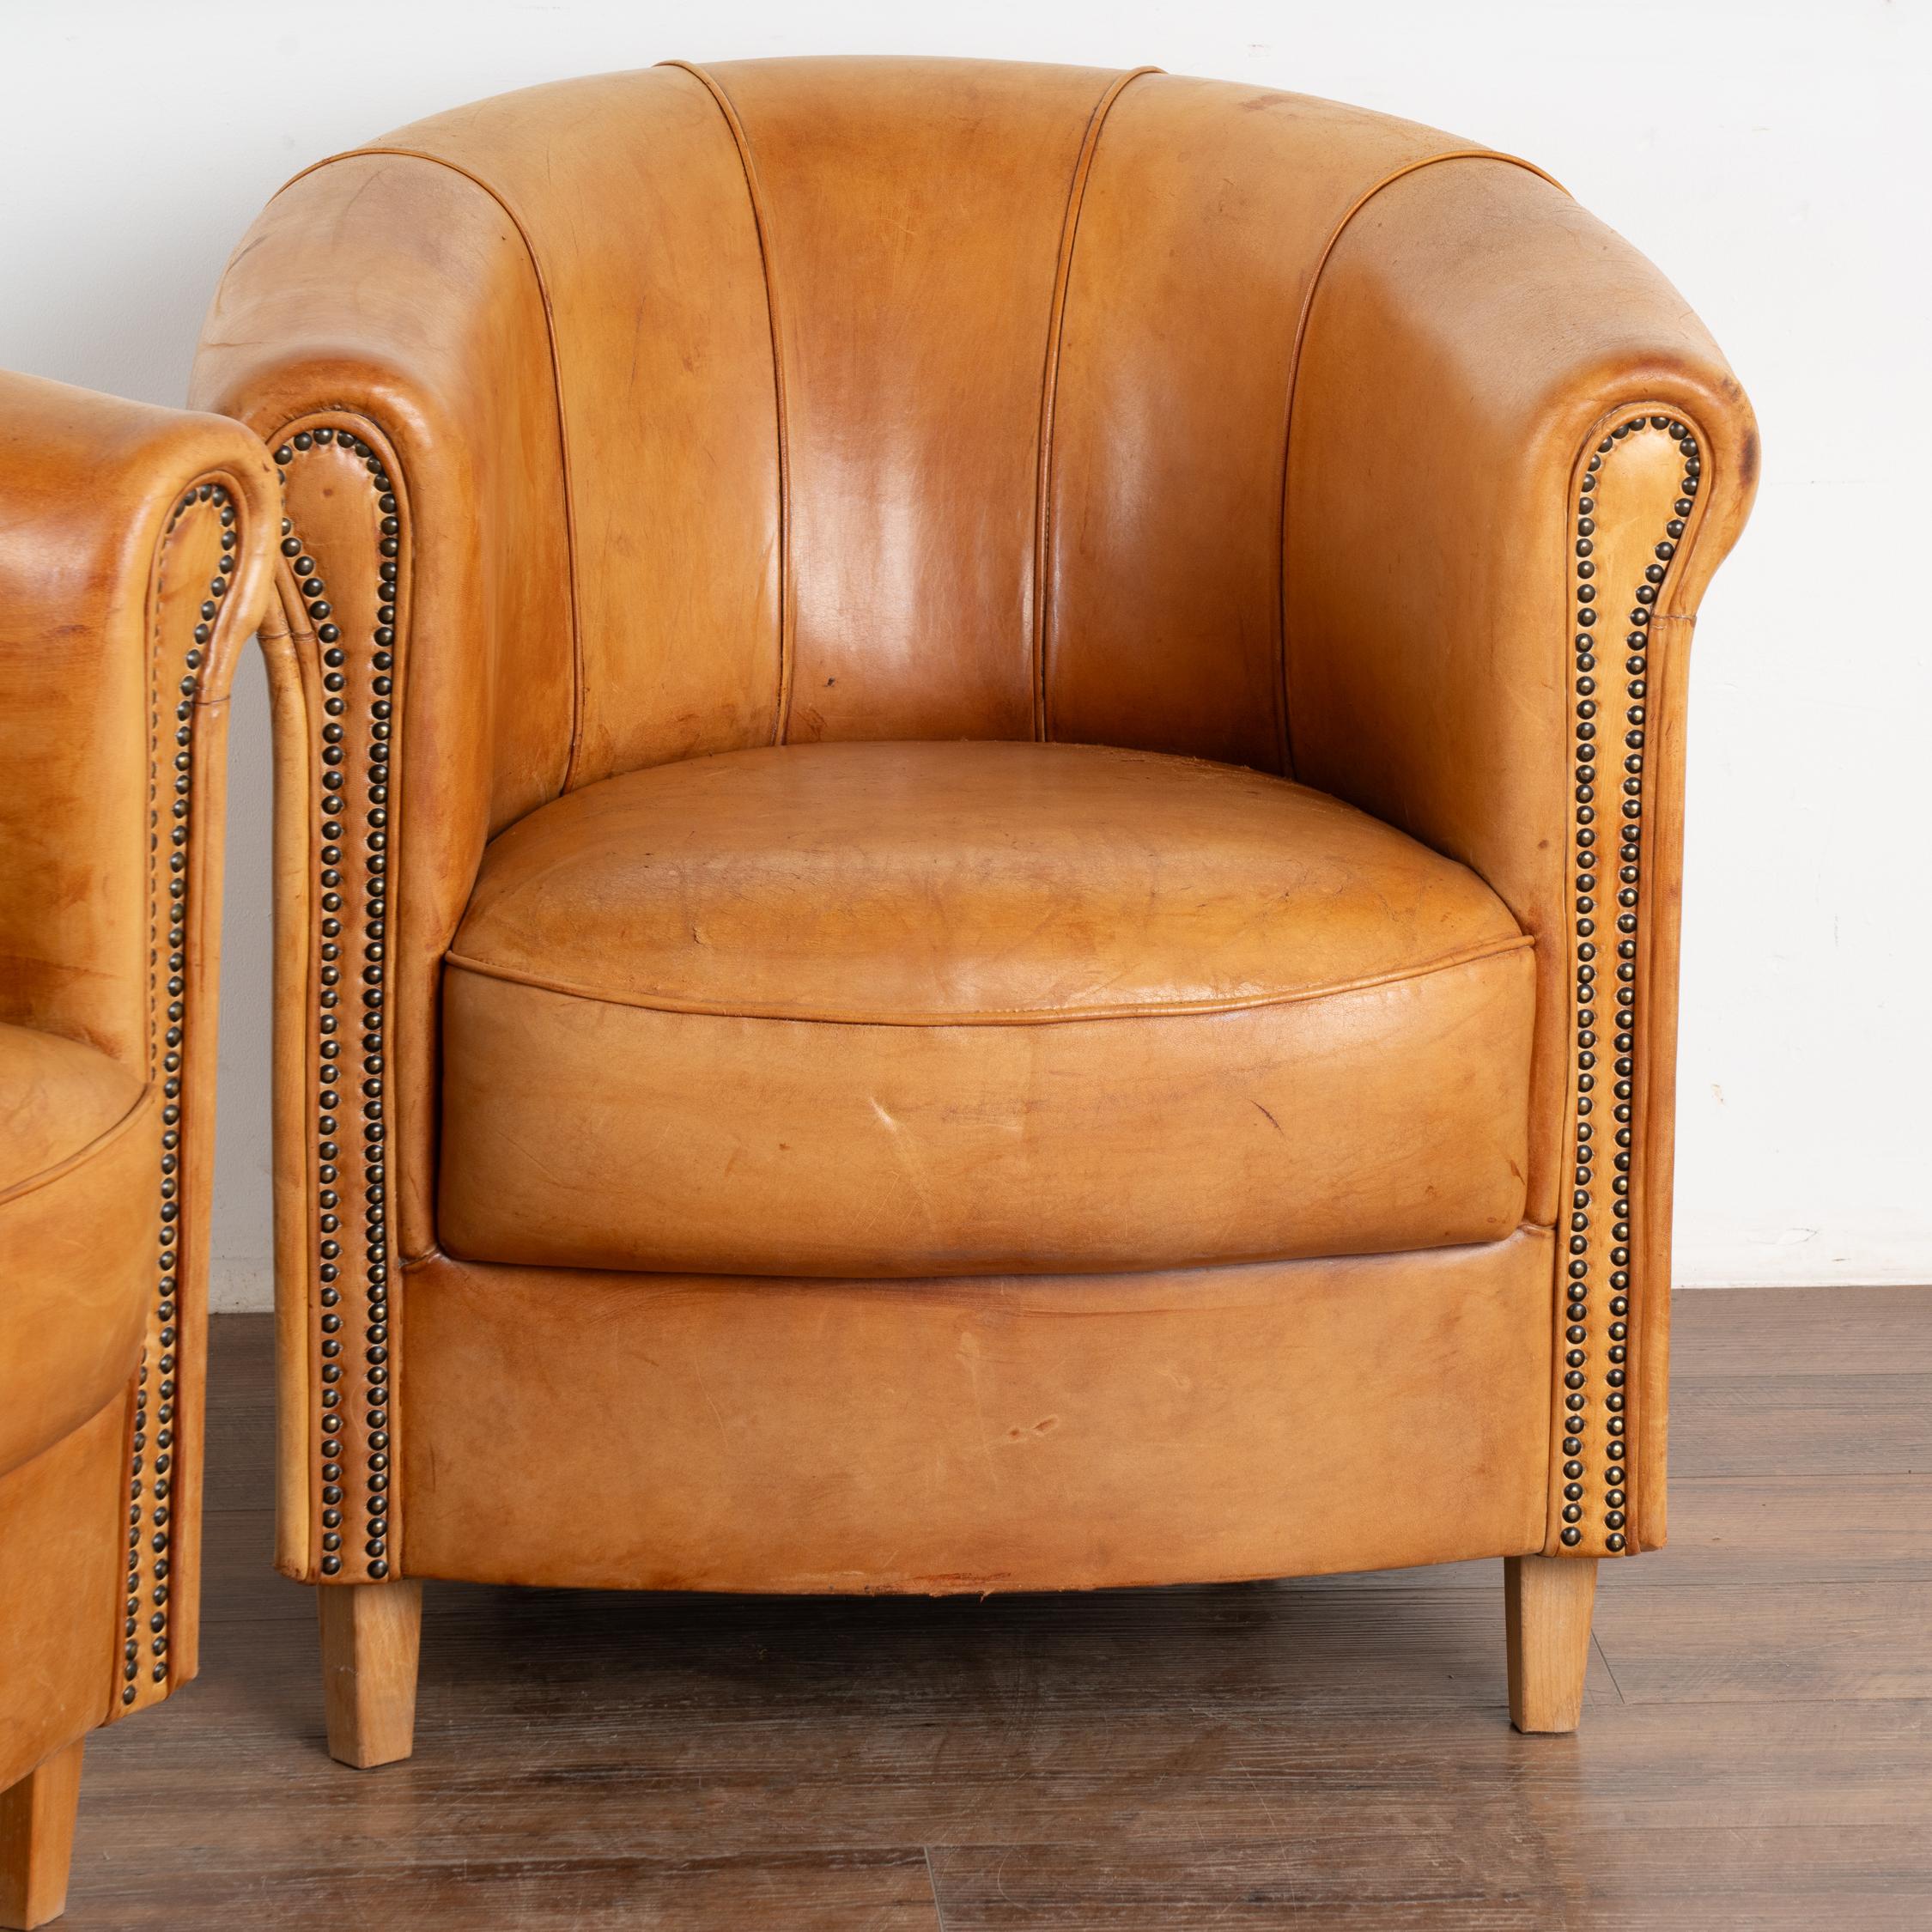 20th Century Pair Art Deco Vintage Leather Club Chairs by Joris of The Netherlands circa 1970